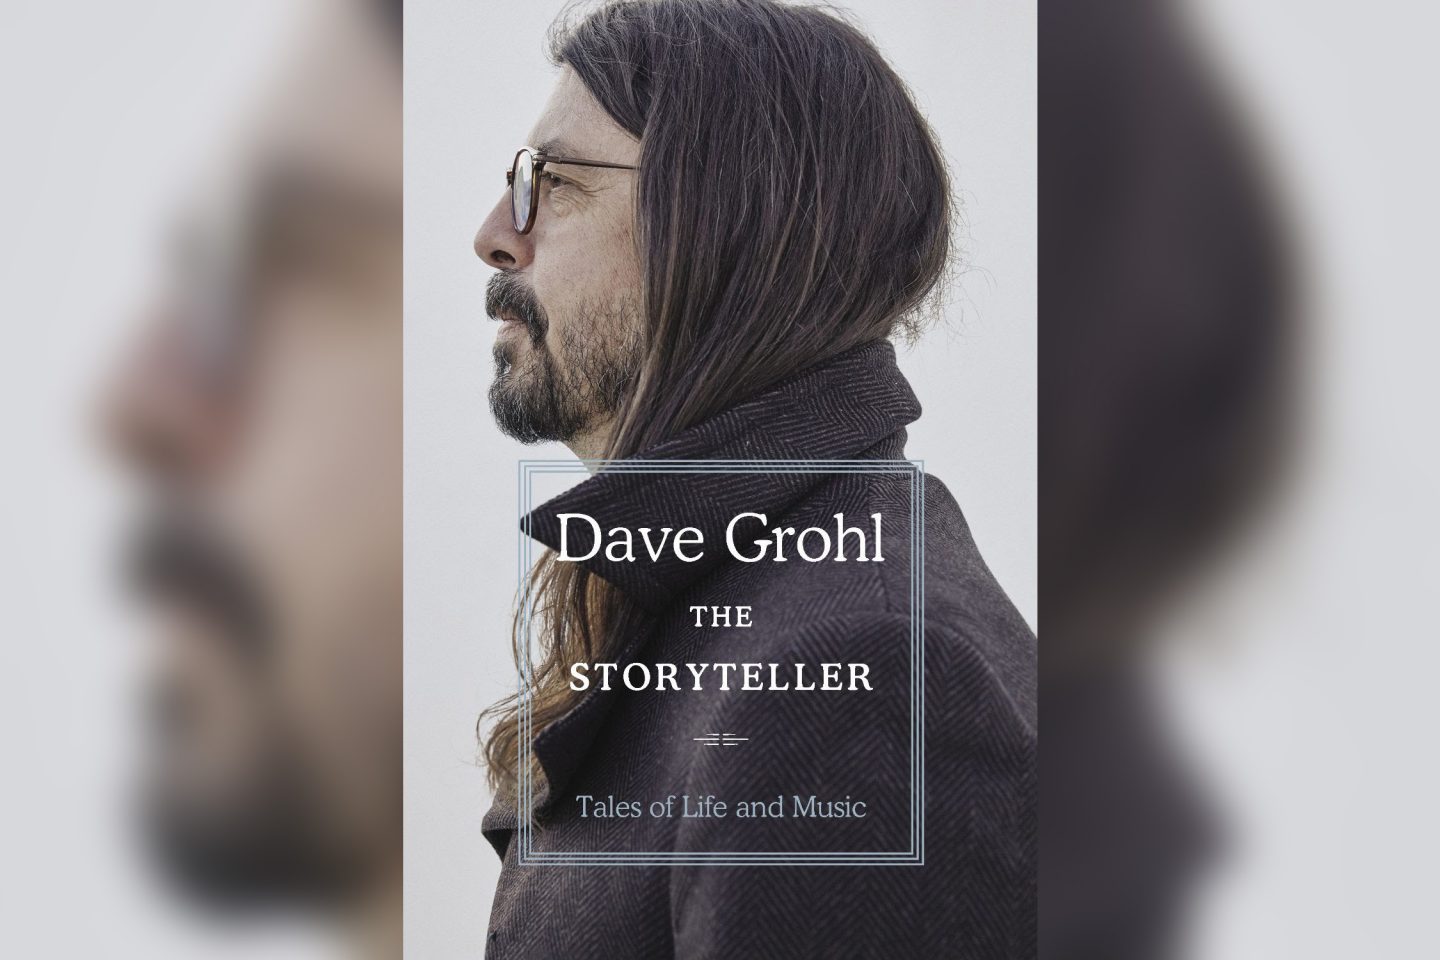 dave grohl book the storyteller